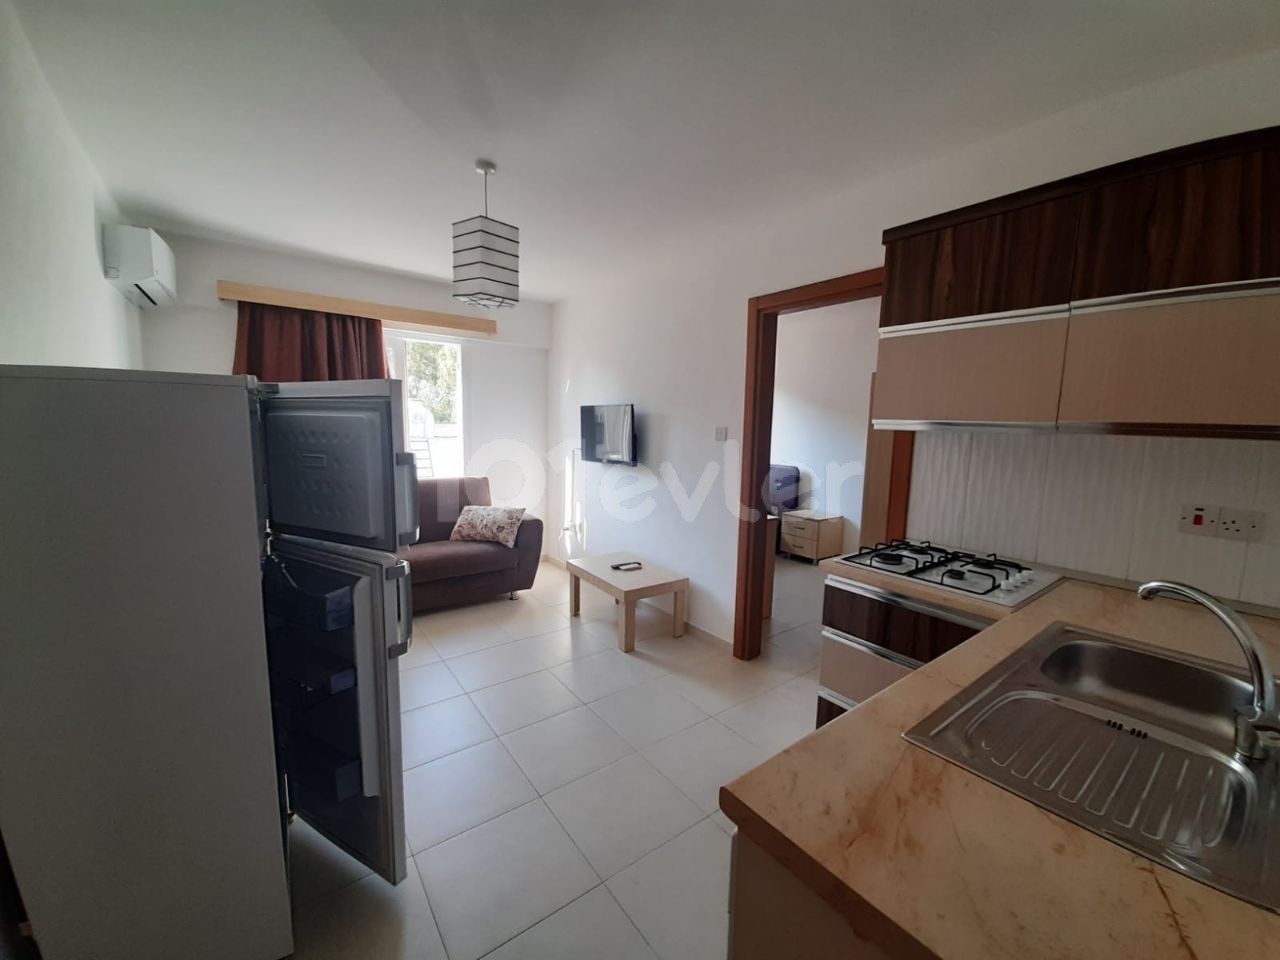 1 + 1 clean apartments for rent right opposite dogu akdeniz university rent 2300 $ deposit 200 $ commission 200Jul 4.floor There are currently 2 idle apartments in the form of 10 monthly payments, paid for 200 TL for one person, 300 TL for two ** 